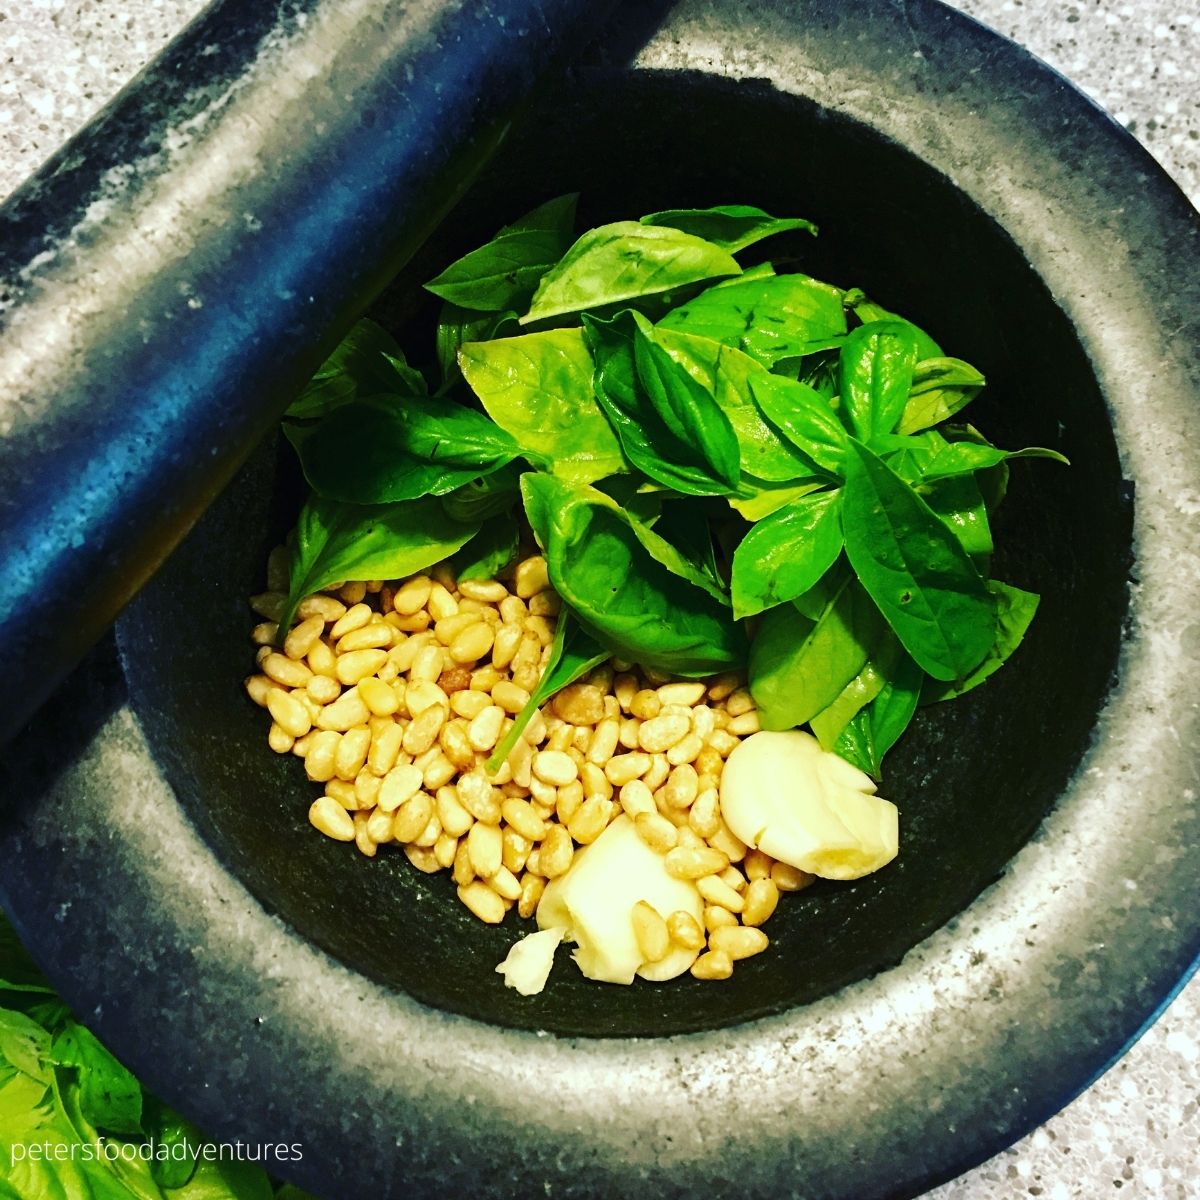 pesto ingredients placed in pestle and mortar